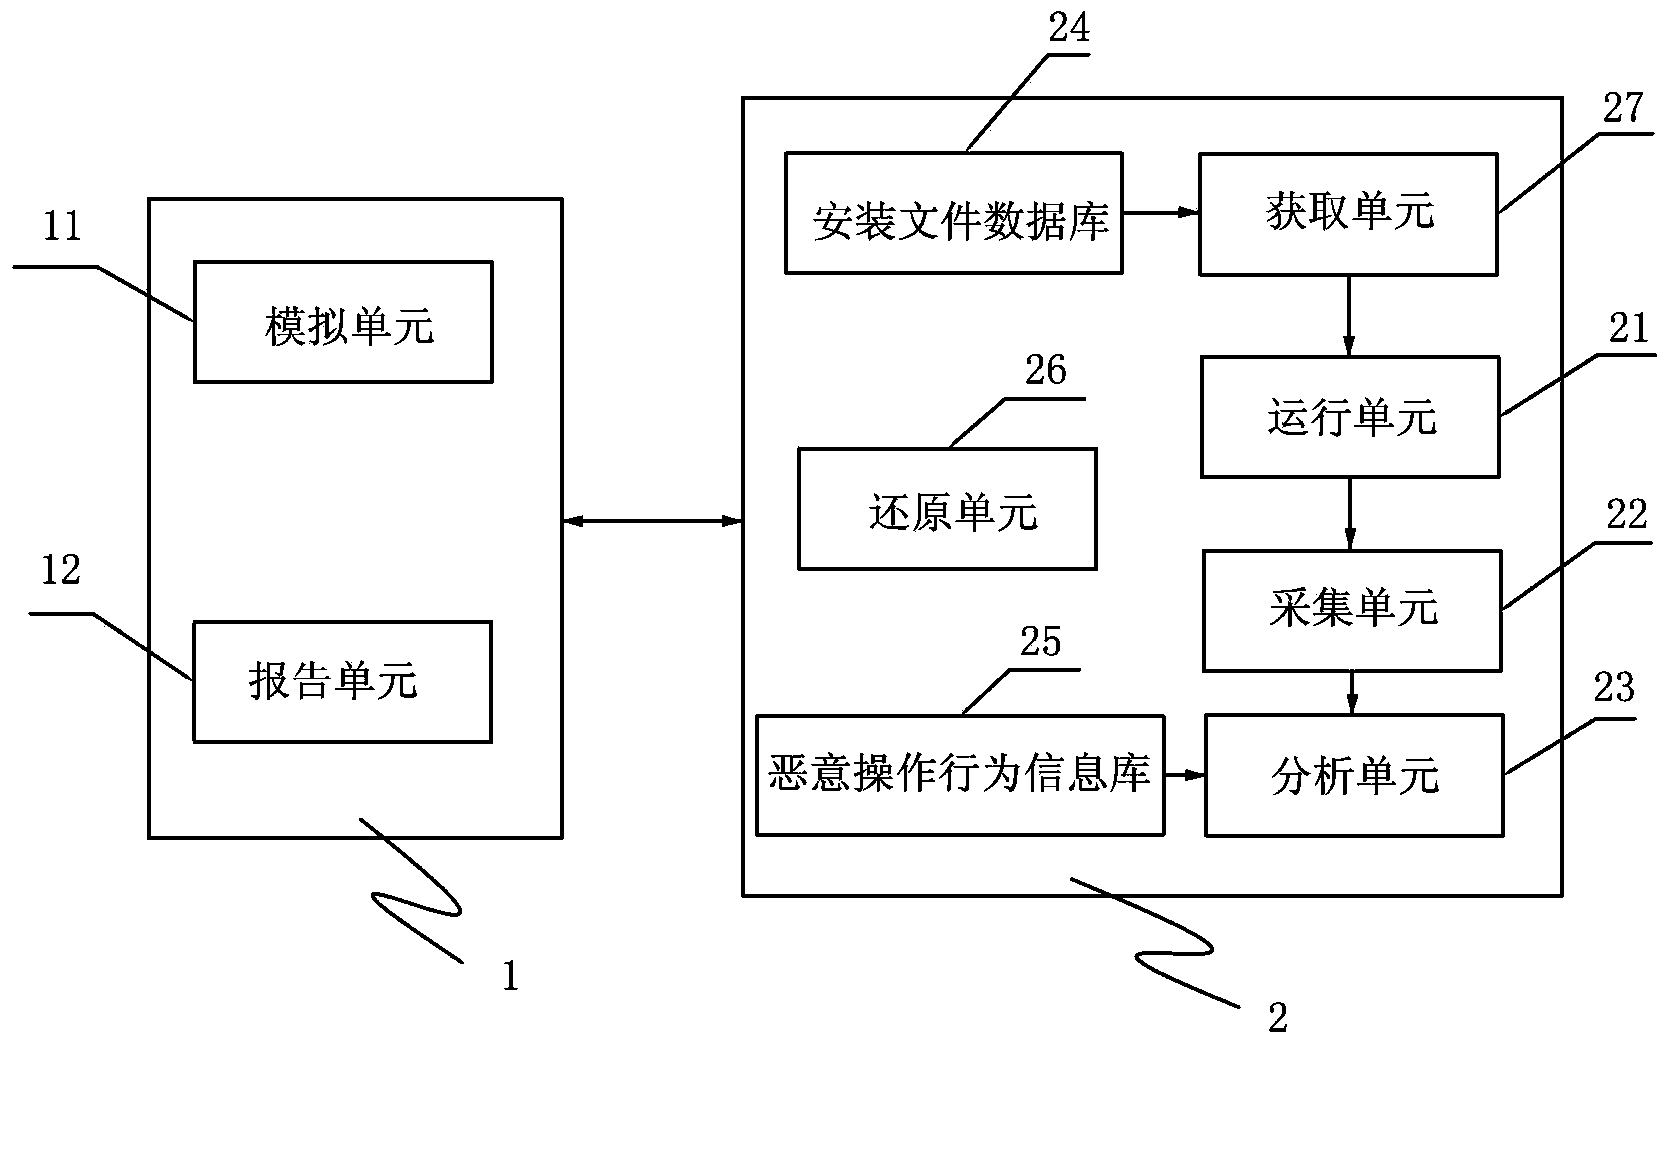 Virtual installing device and method for mobile phone programs